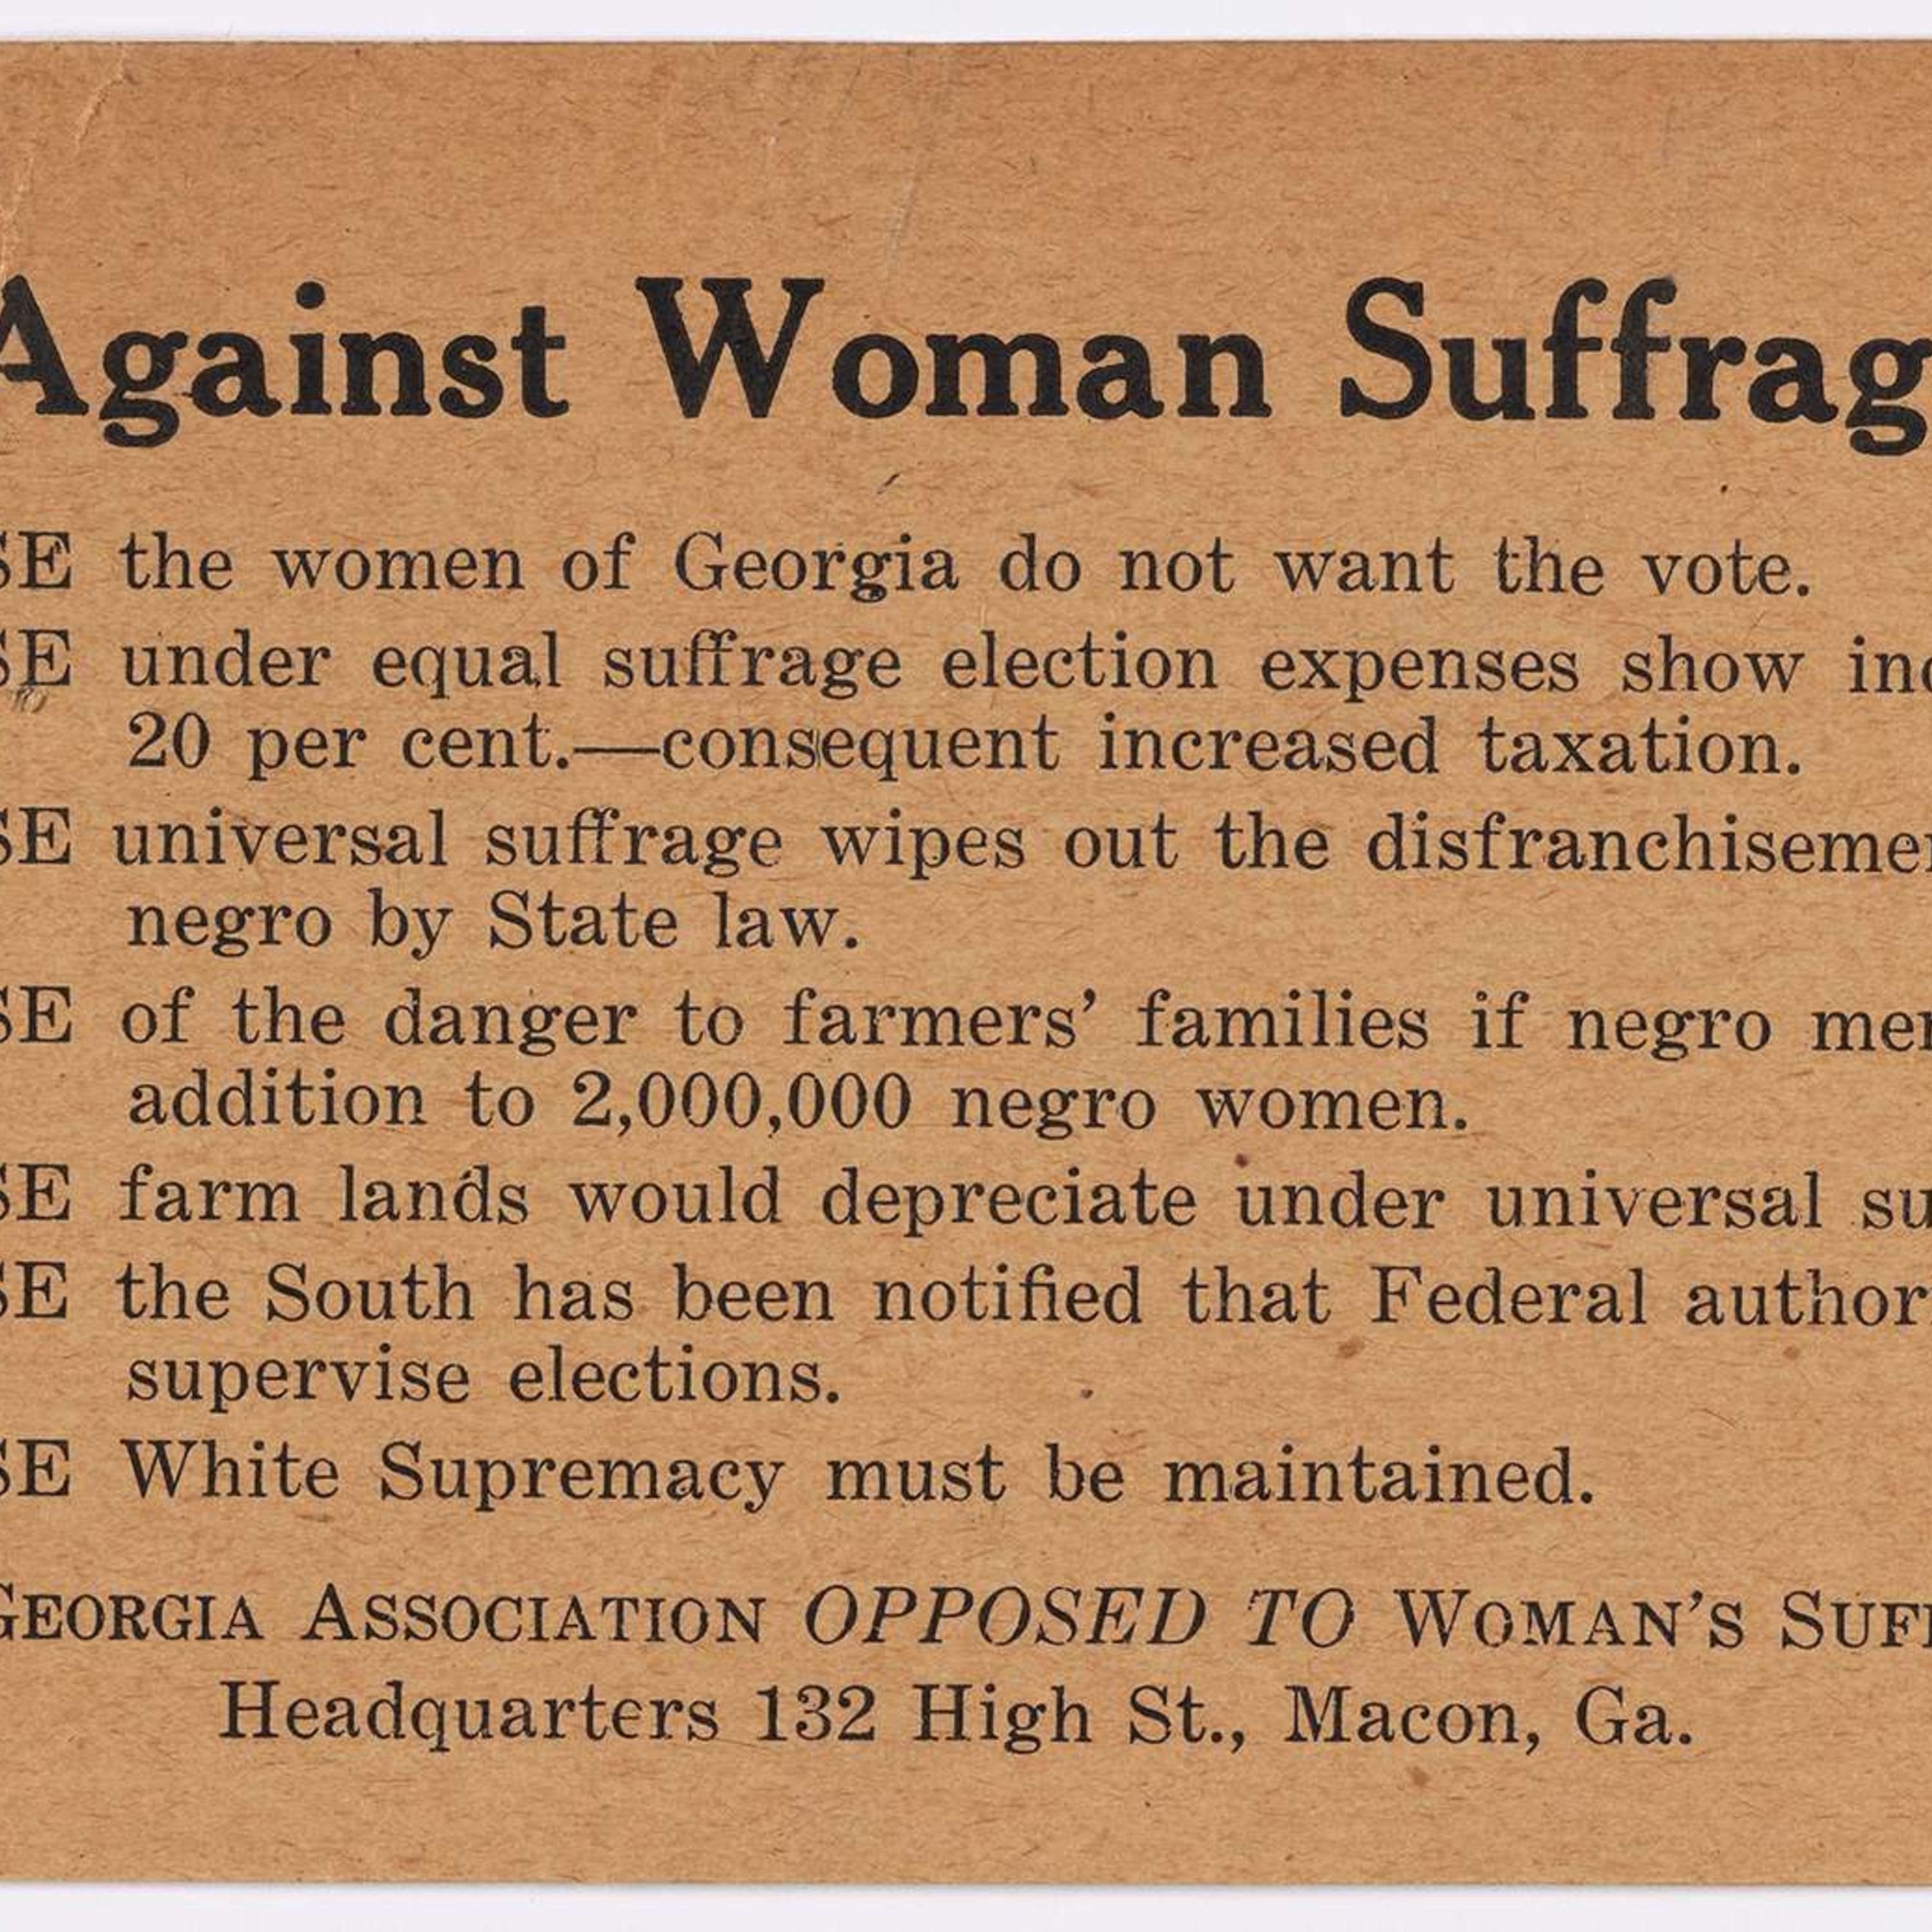 Vote_Against_Woman_Suffrage_-_Georgia_Association_Opposed_to_Woman_Suffrage,_c._1915.jpg